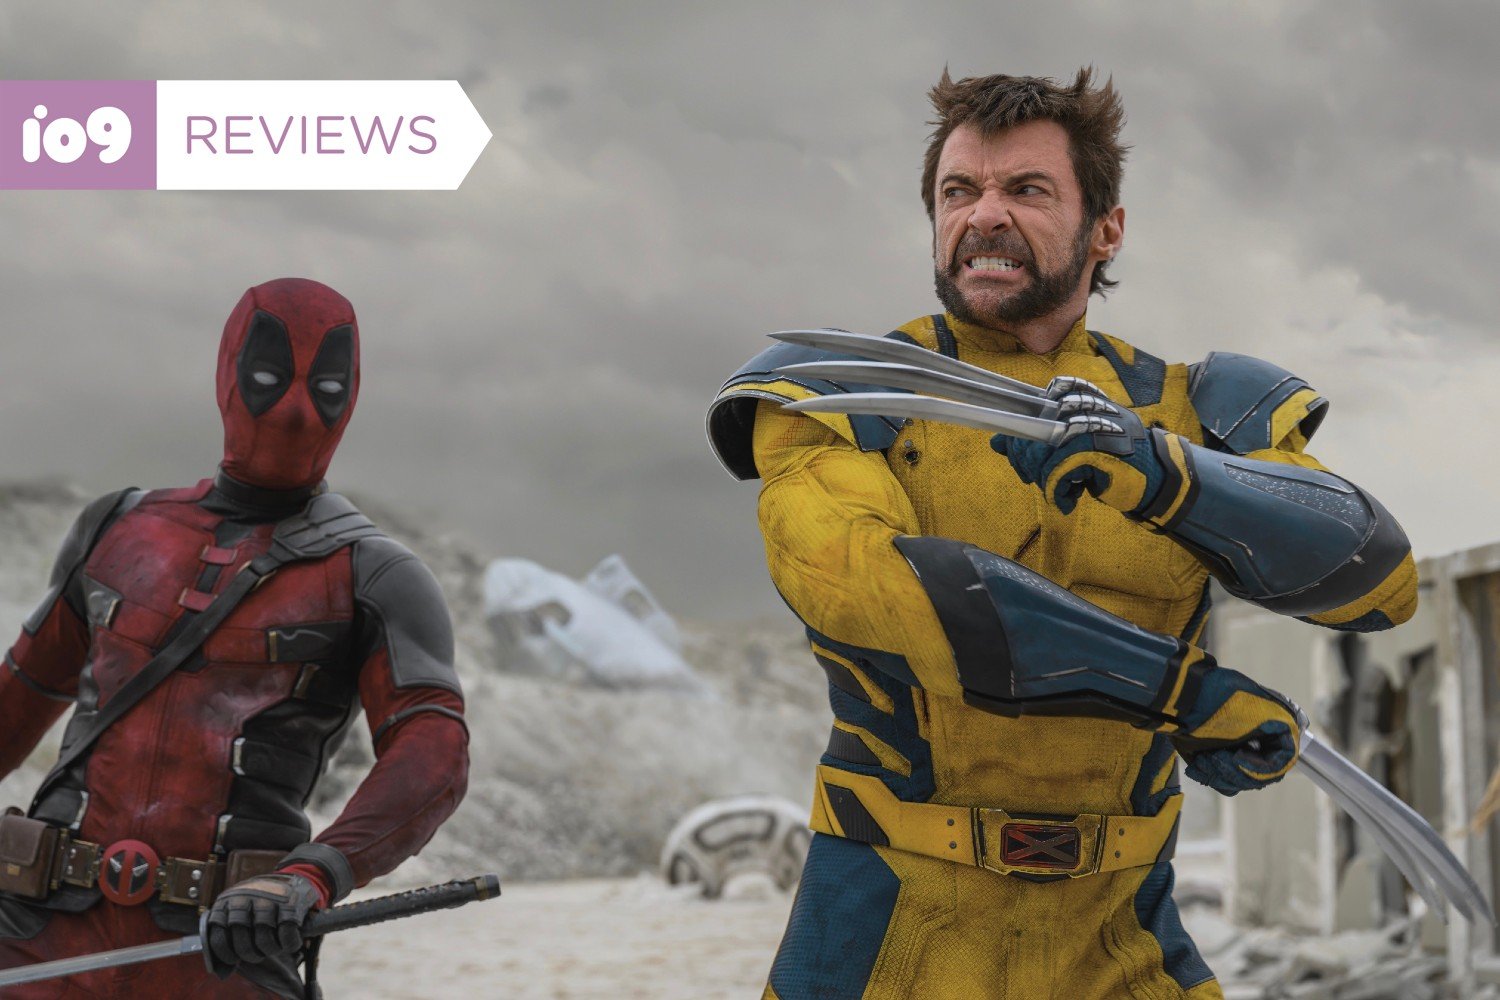 Deadpool & Wolverine Is Everything a Marvel Fan Could Want, for Better or Worse